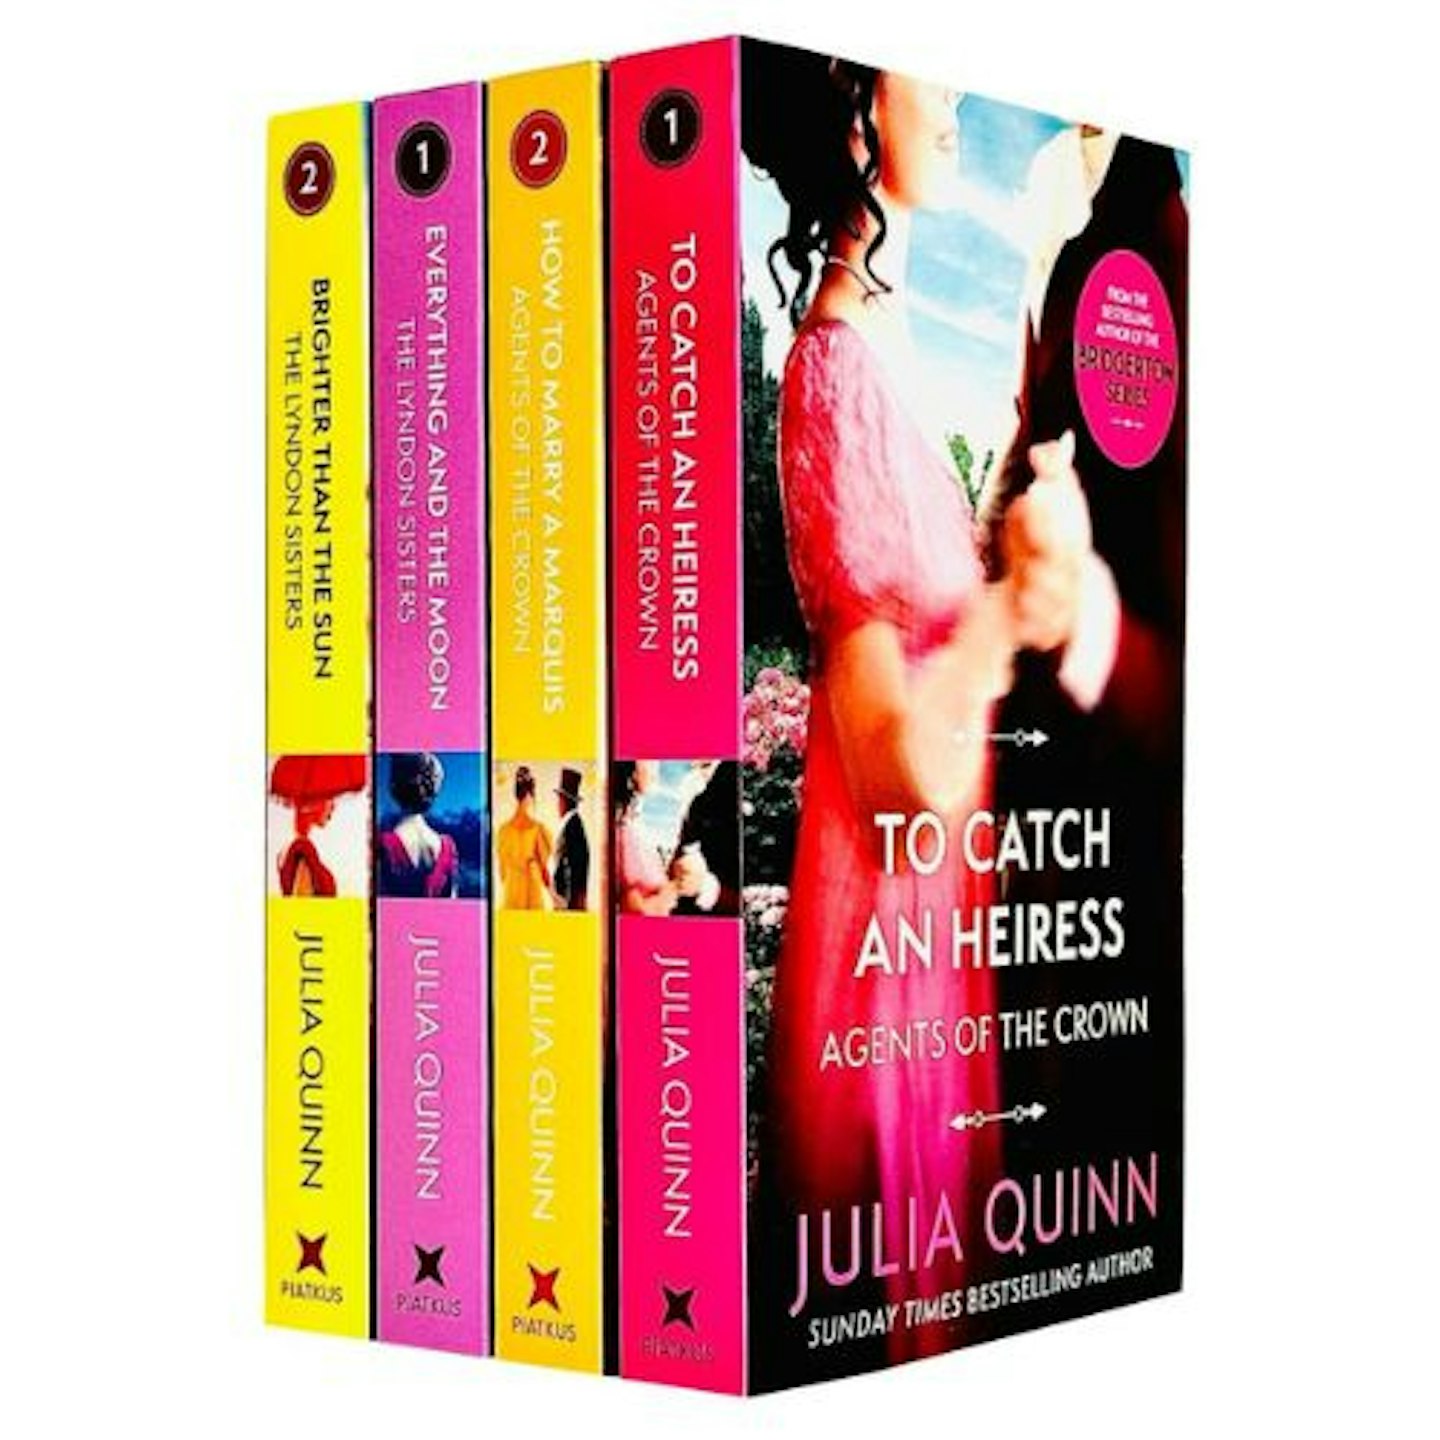 Julia Quinn Agents of the Crown and Lyndon Sisters Books Collection